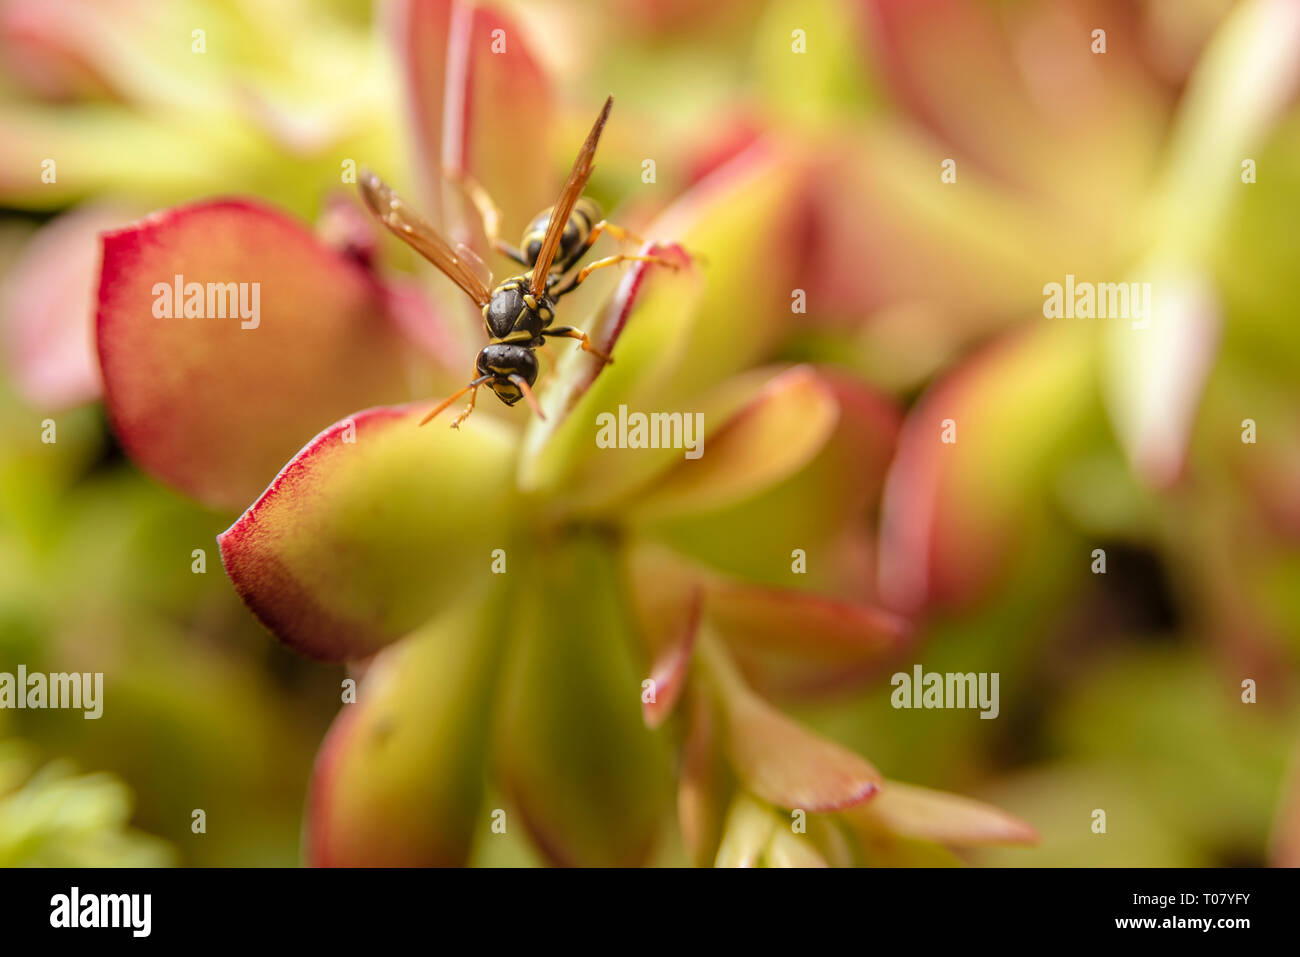 Paper wasp on succulent plant Stock Photo